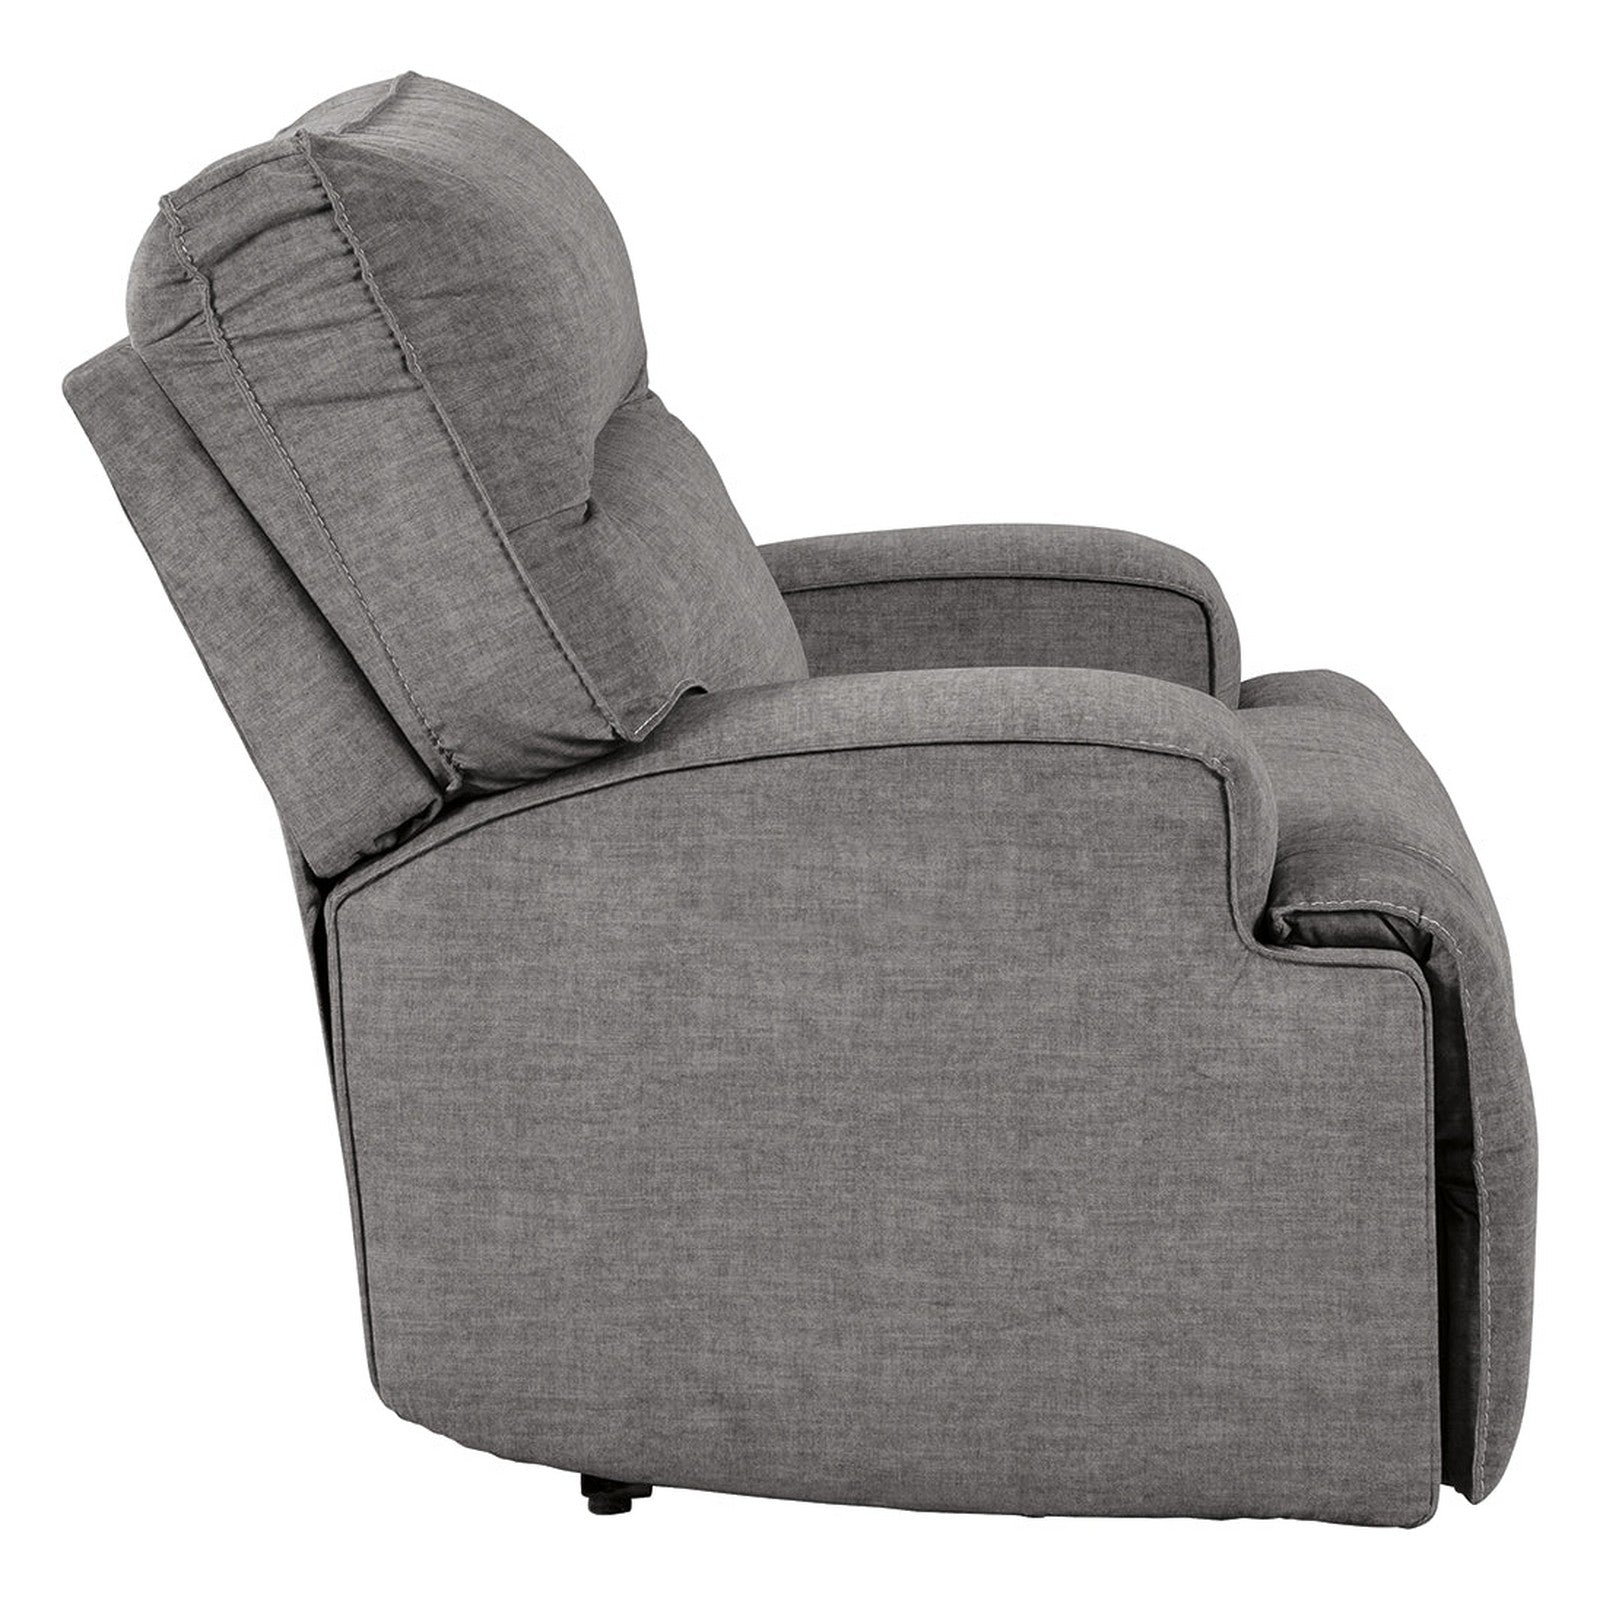 Coombs Oversized Power Recliner Ash-4530282